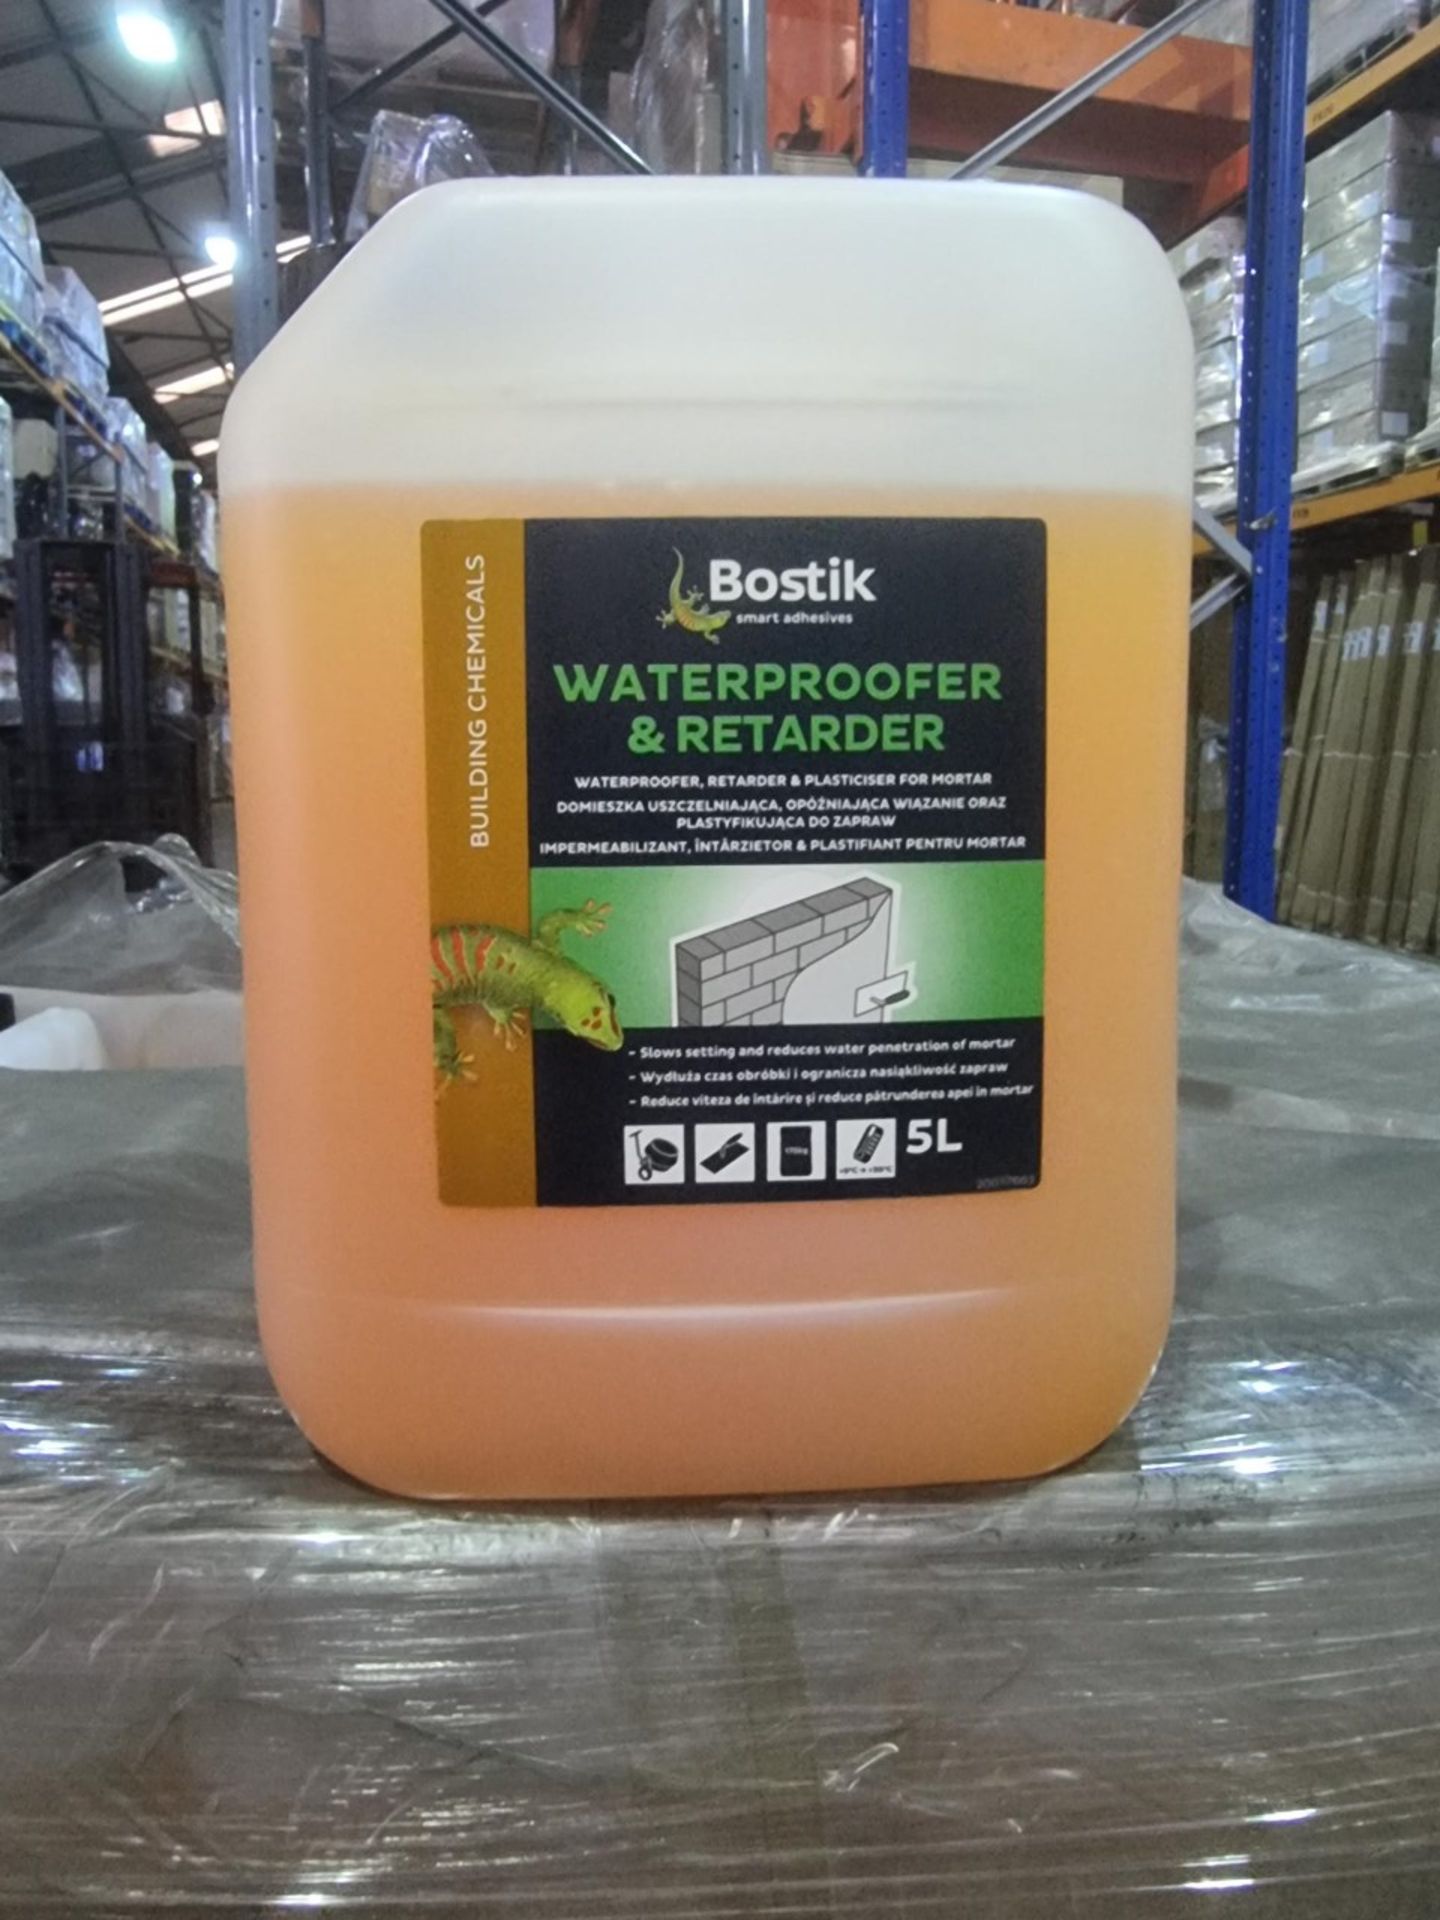 (B130) PALLET TO CONTAIN 54 x 5L TUBS OF BOSTIK WATERPROOFER & RETARDER. RRP £22 PER TUB - Image 2 of 2